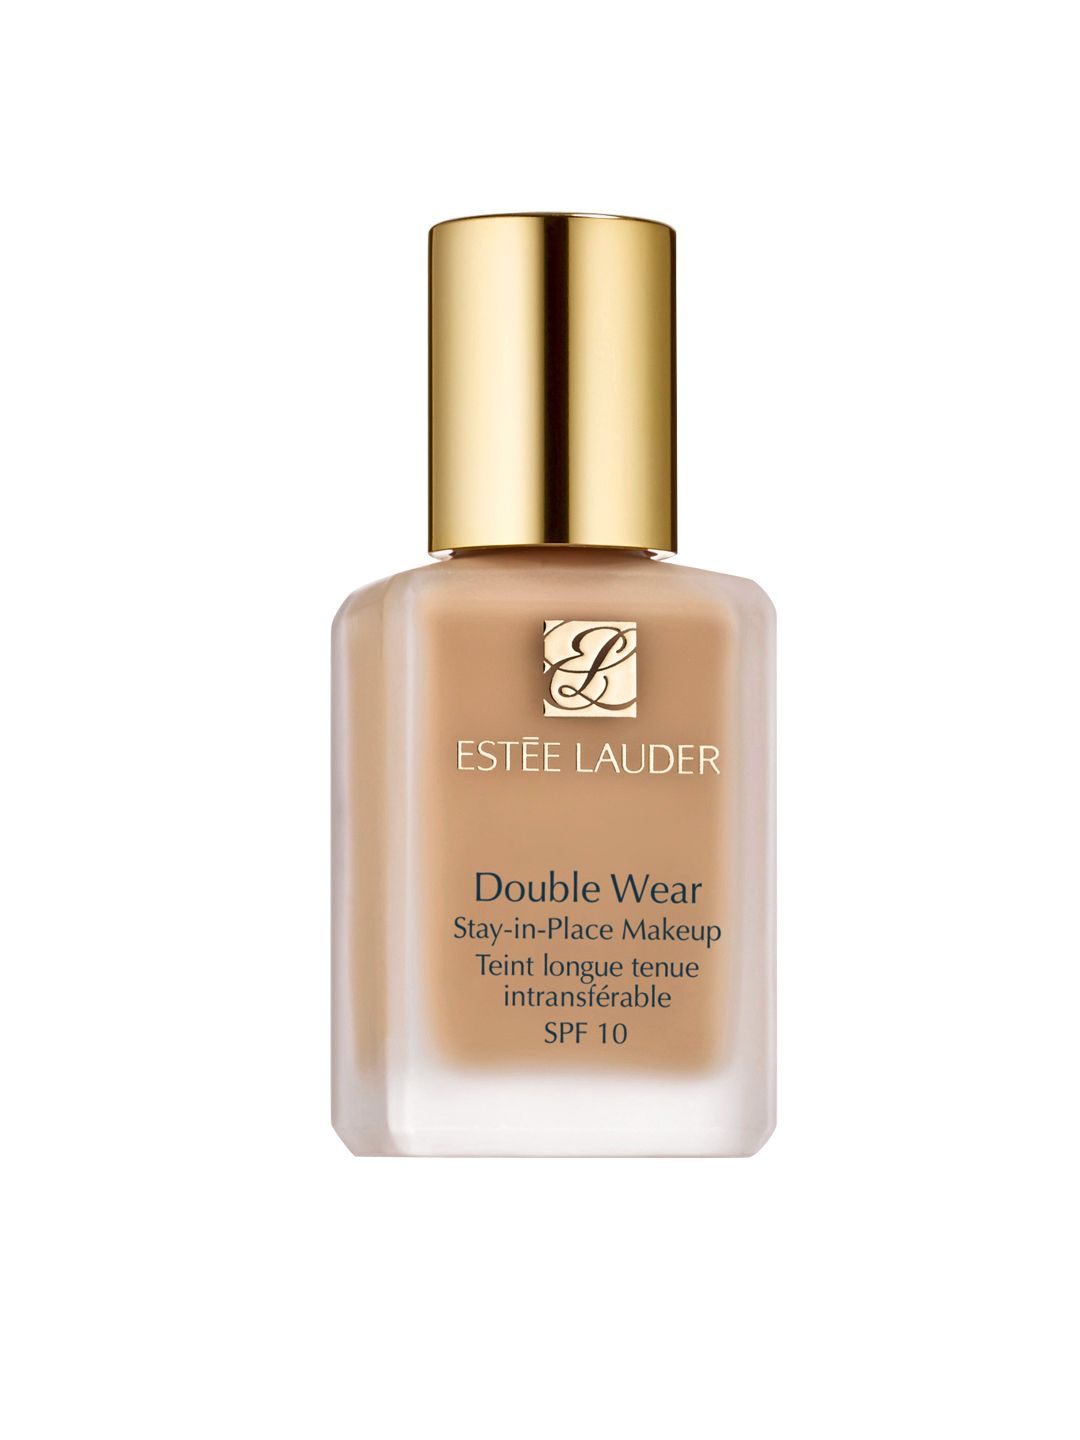 Estee Lauder Double Wear Stay-in-Place SPF 10 Makeup Foundation - Ecru 30 ml Price in India